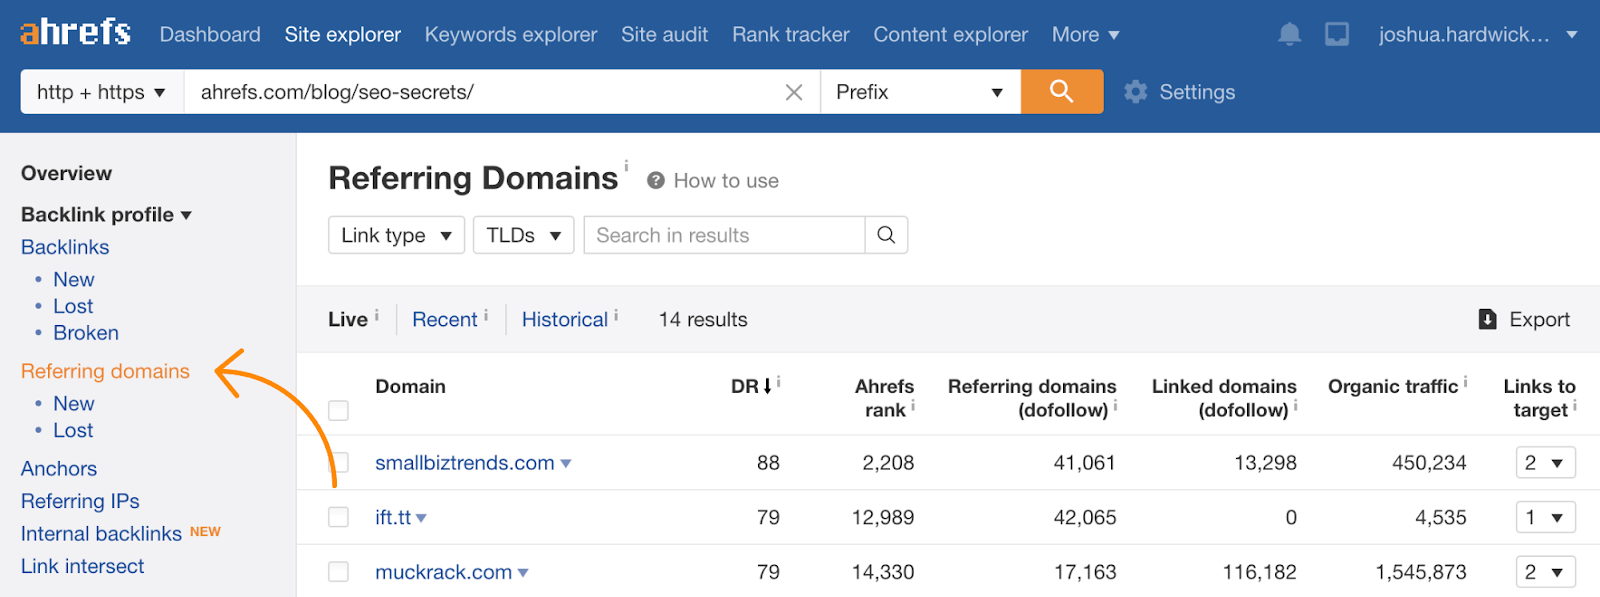 8 referring domains ahrefs